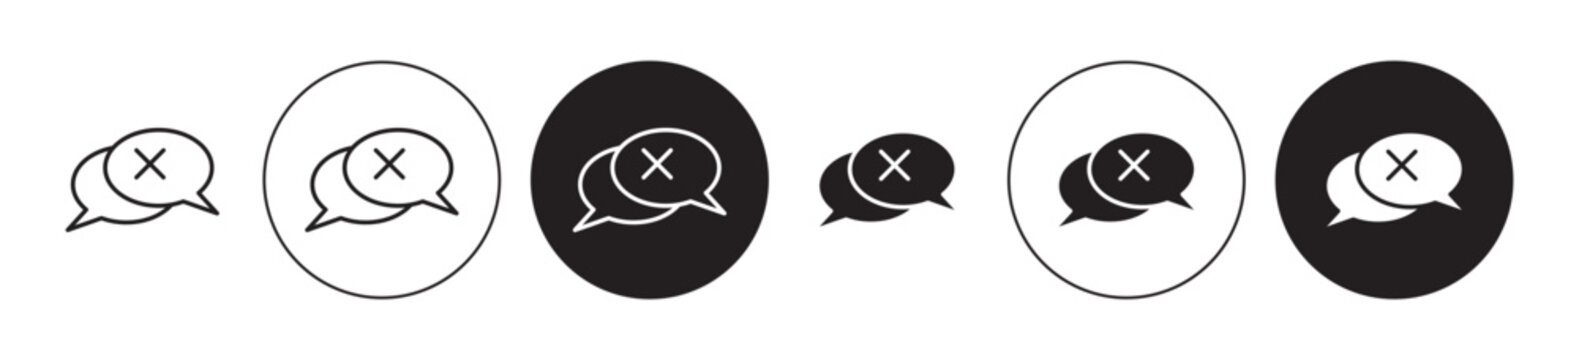 Disagreement line icon set. Dispute or conflict symbol. Communication disagree icon. Discussion miscommunication sign for ui designs.